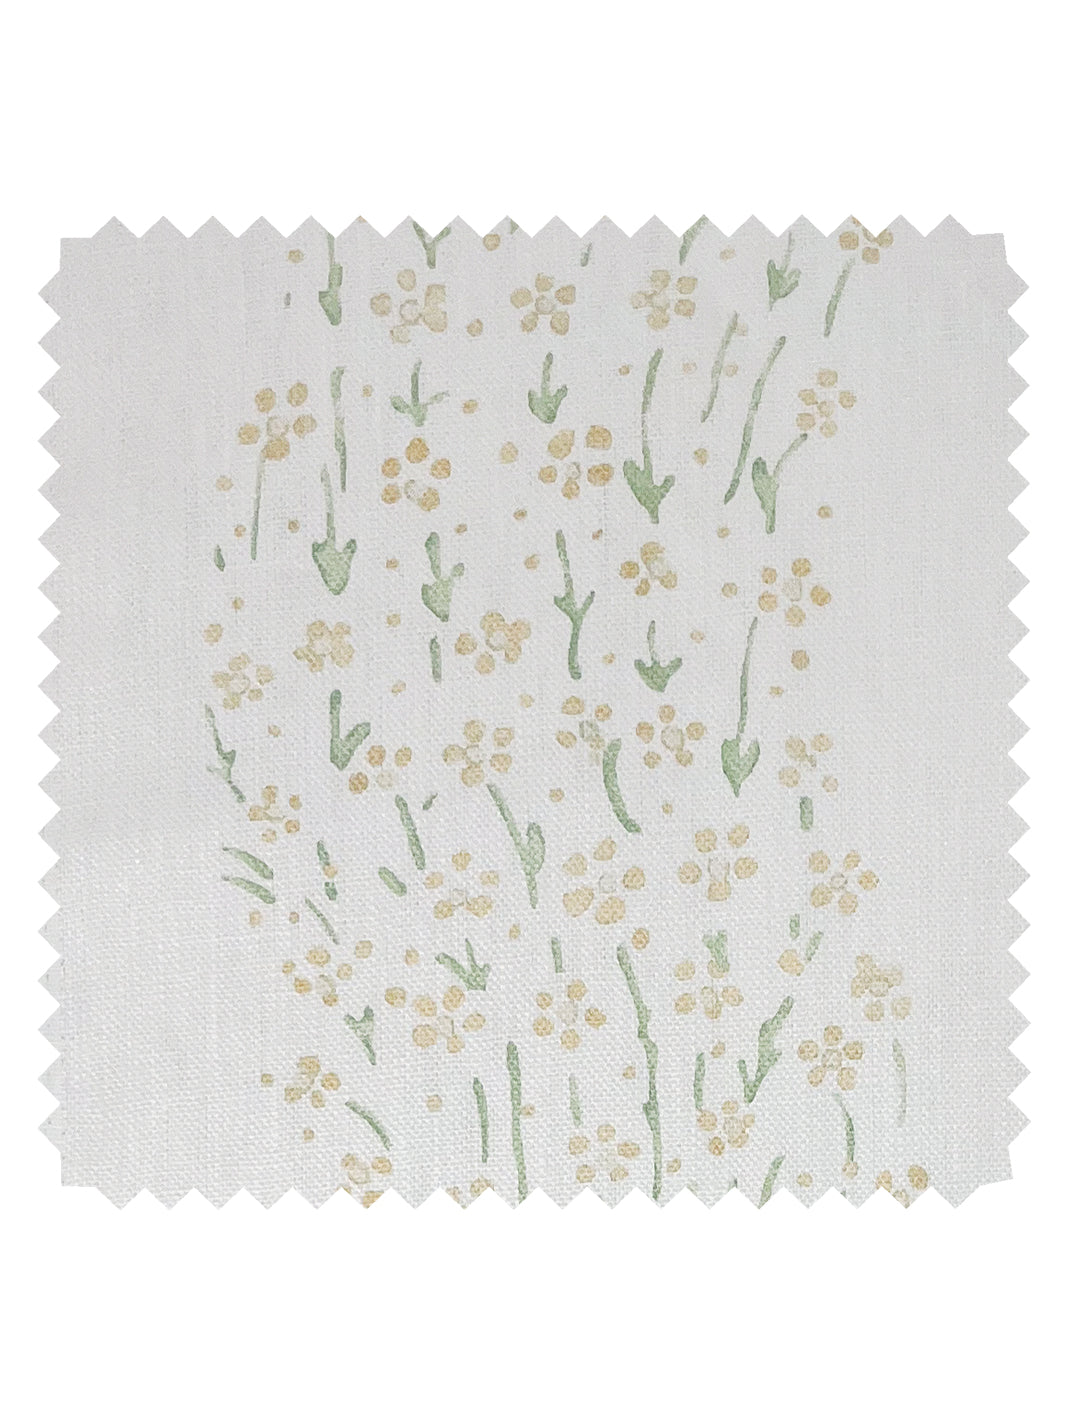 'Hillhouse Floral Ditsy Wave' Linen Fabric by Nathan Turner - Gold Green